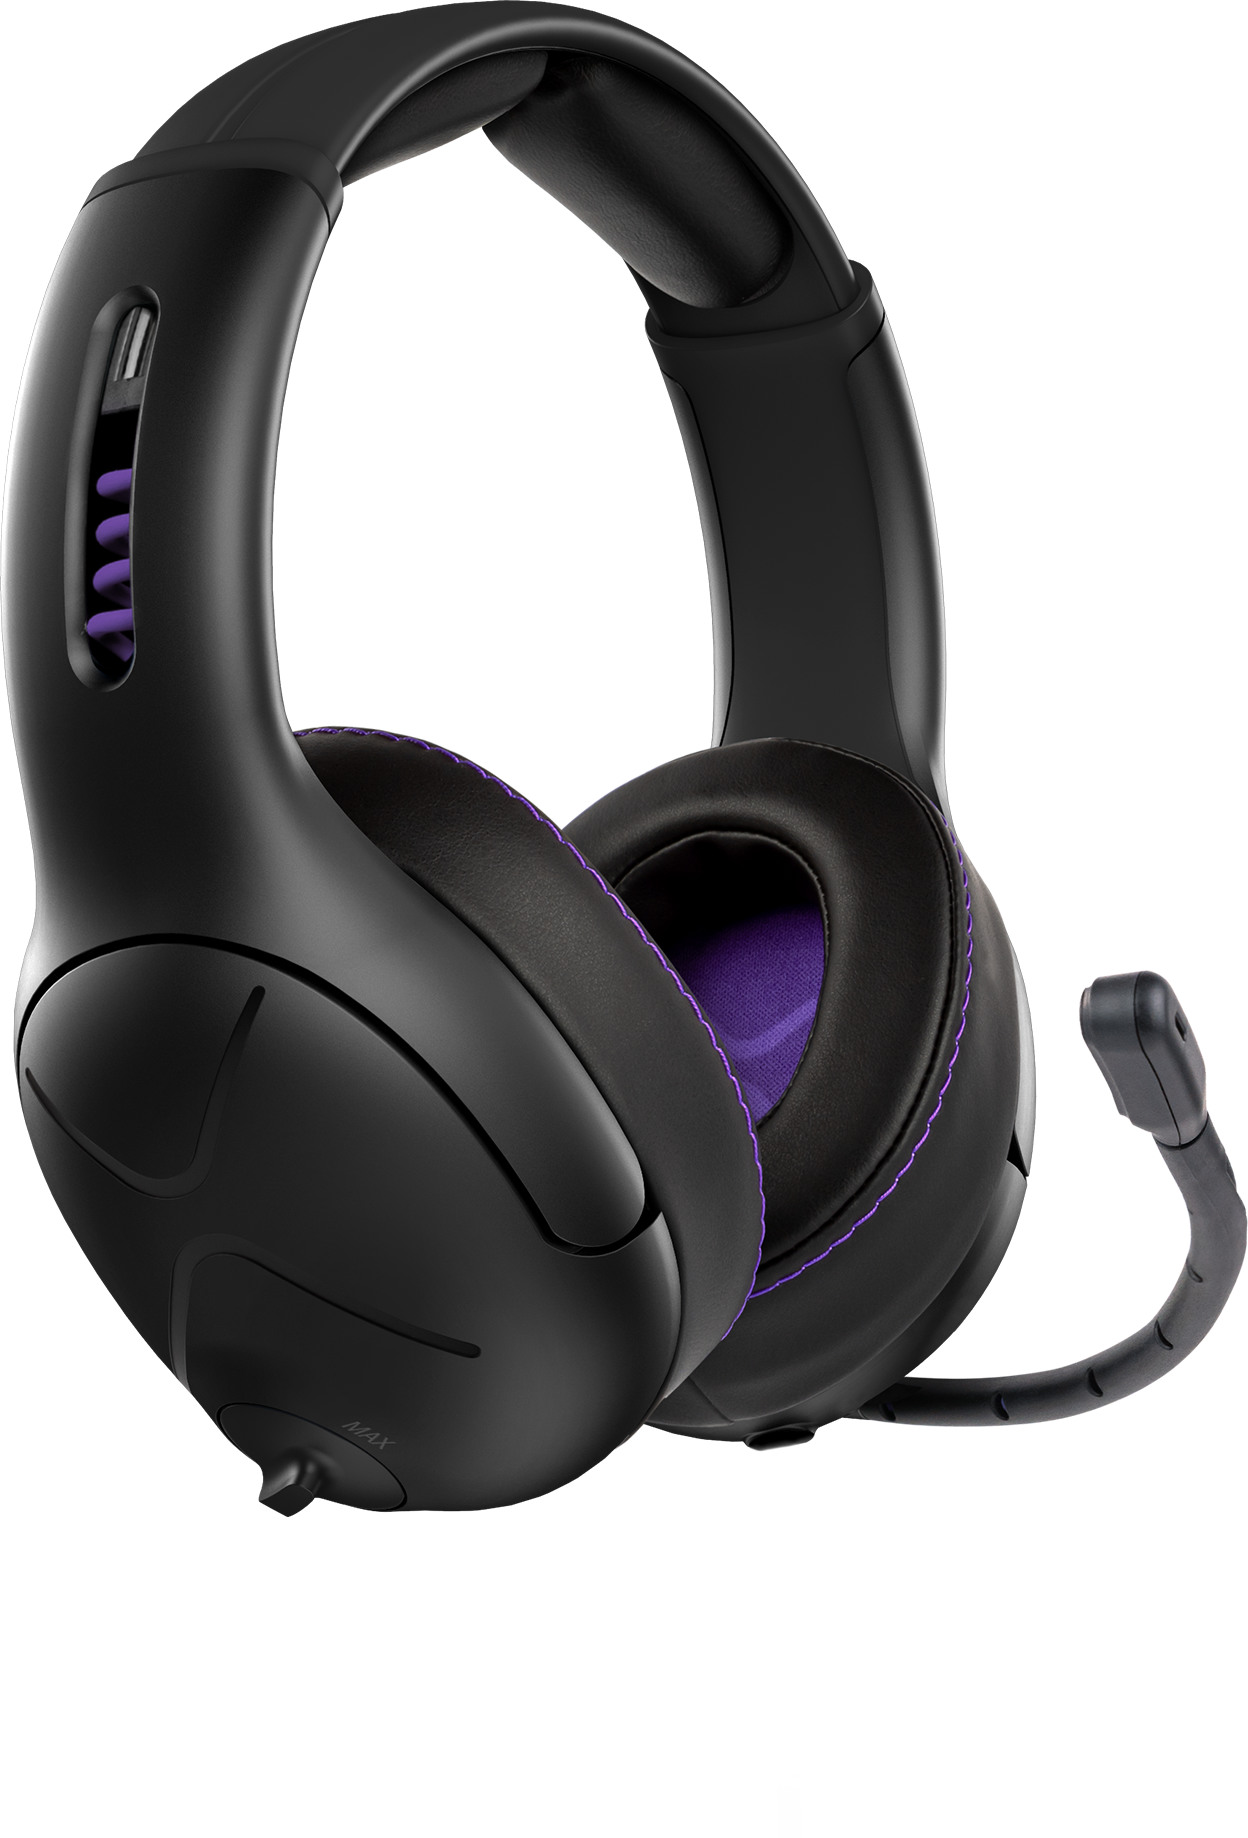 VICTRIX Gambit Headset 052-003-EU Wireless for PS4/PS5